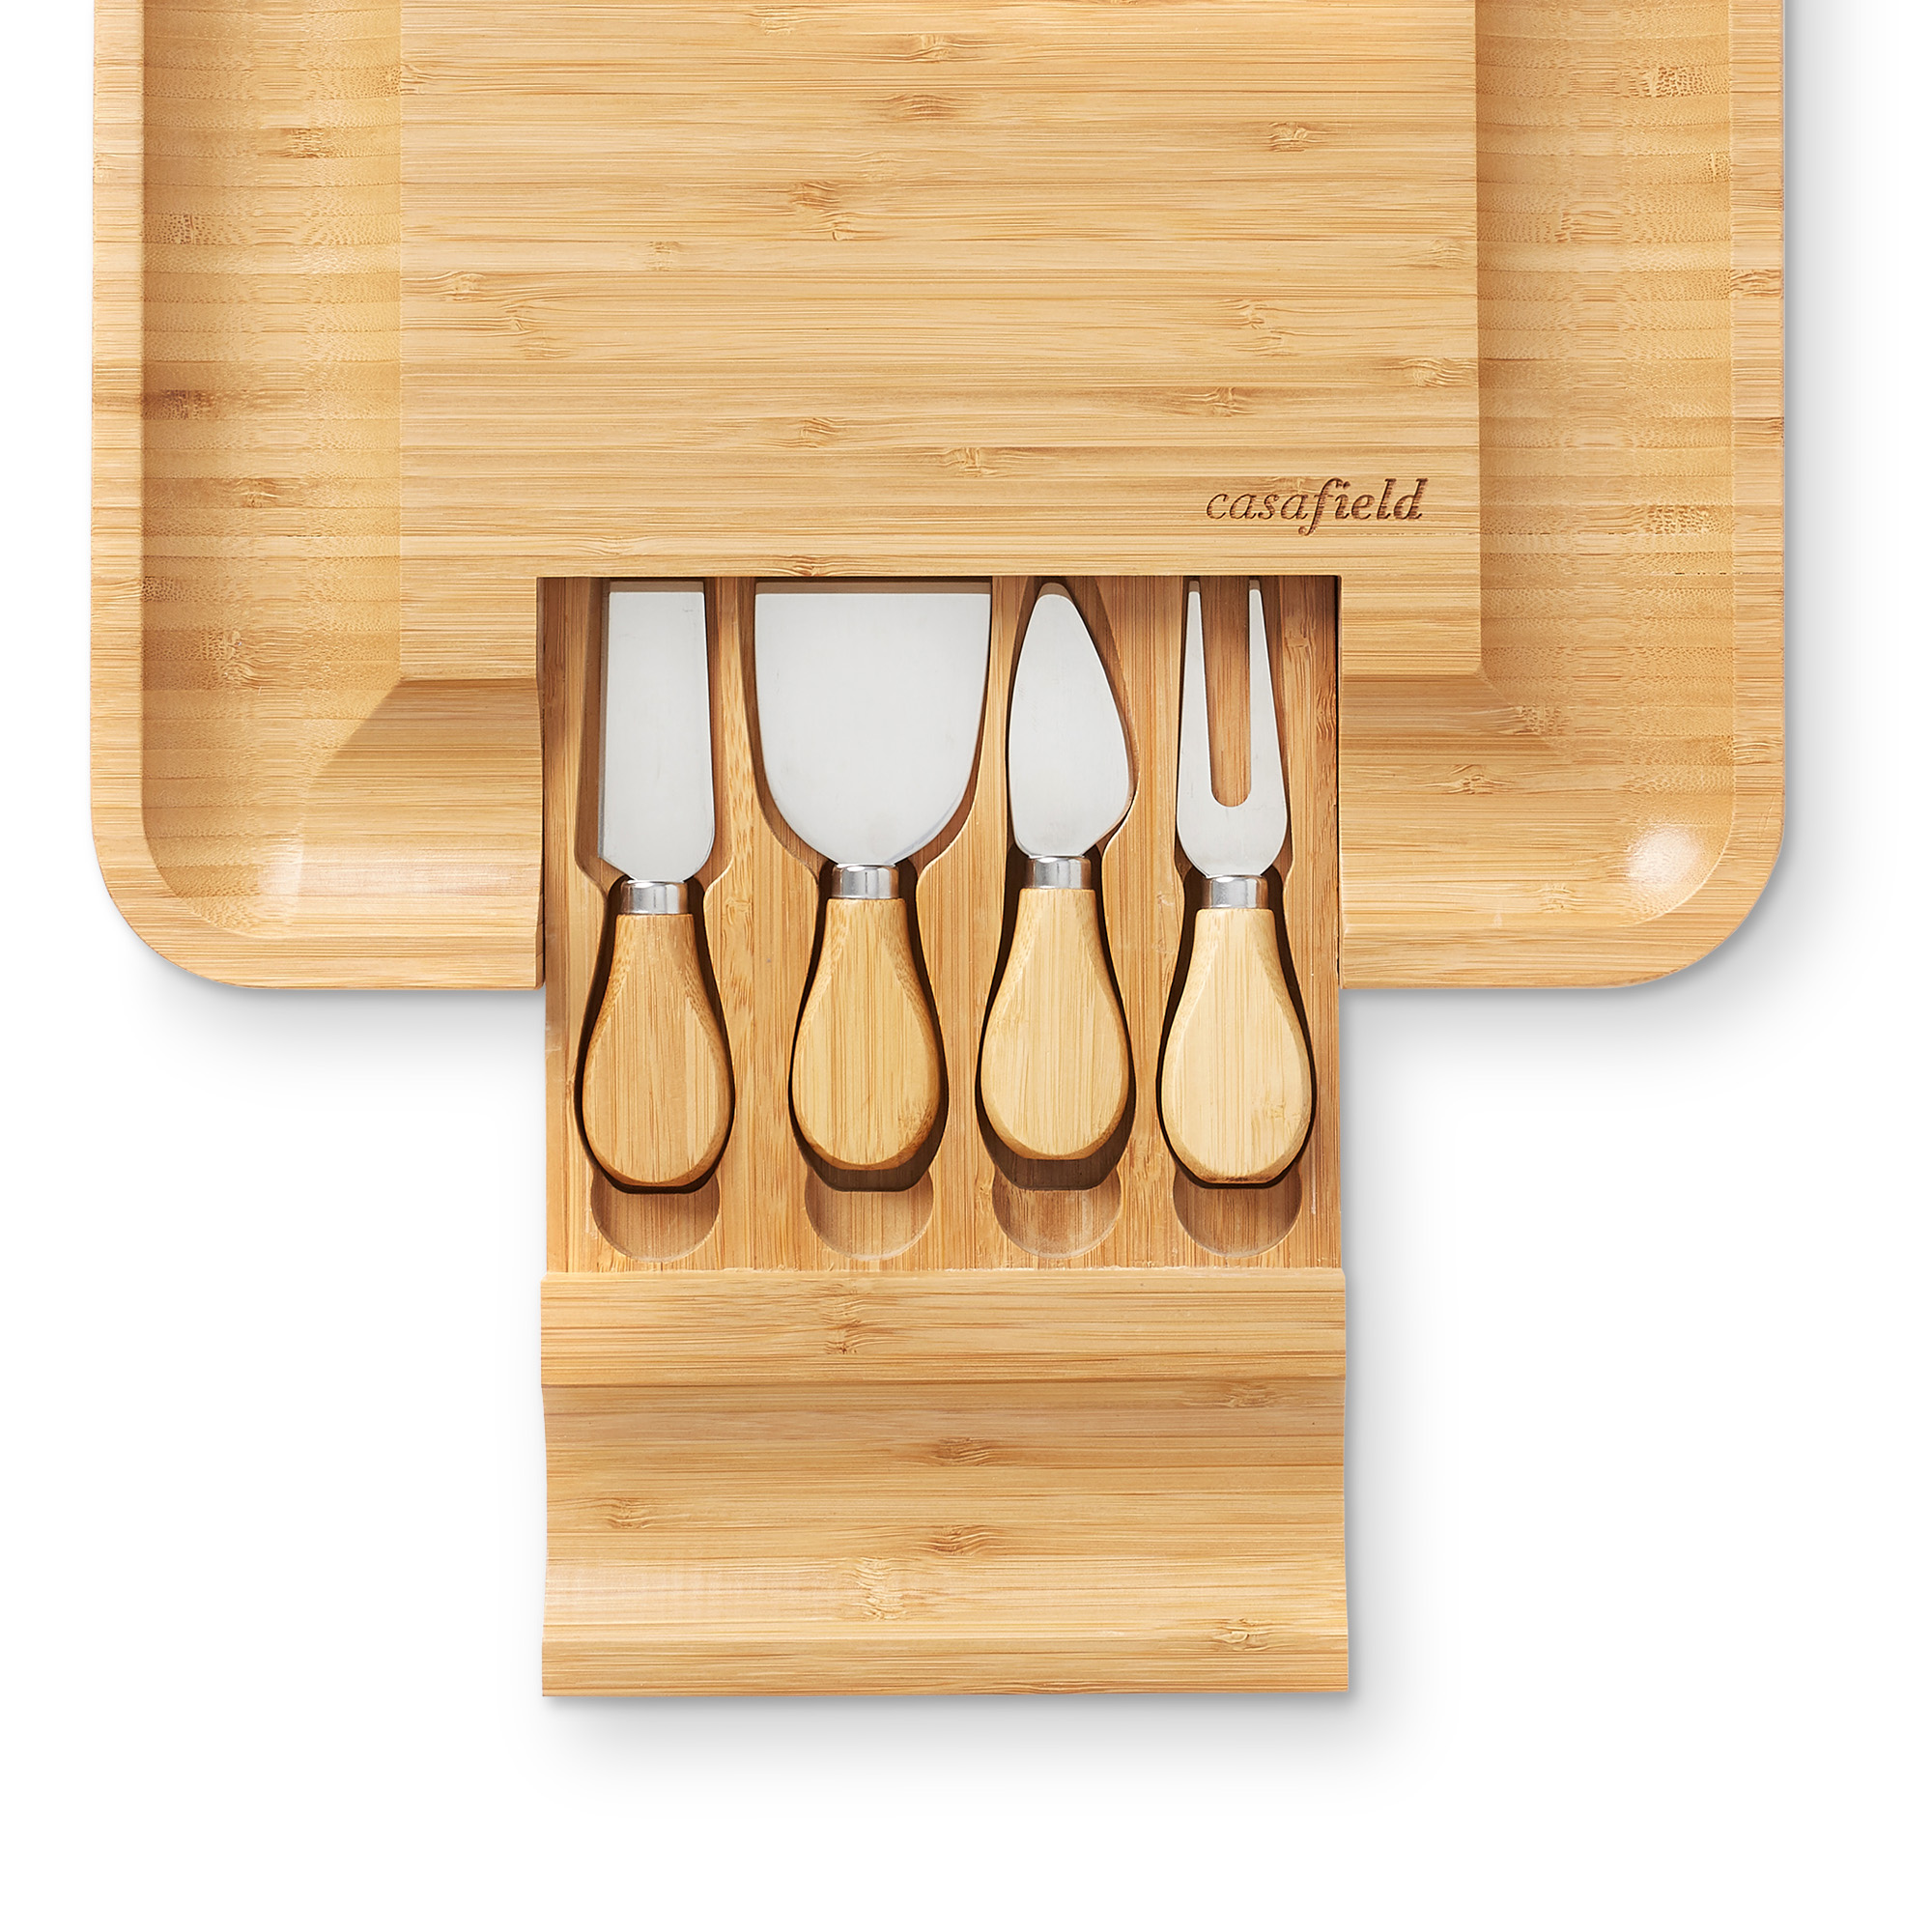 Casafield Organic Bamboo Cheese Cutting Board & Knife Gift Set - Wooden Serving Tray for Charcuterie Meat Platter, Fruit & Crackers - Slide Out Drawer with 4 Stainless Steel Knives - image 4 of 7